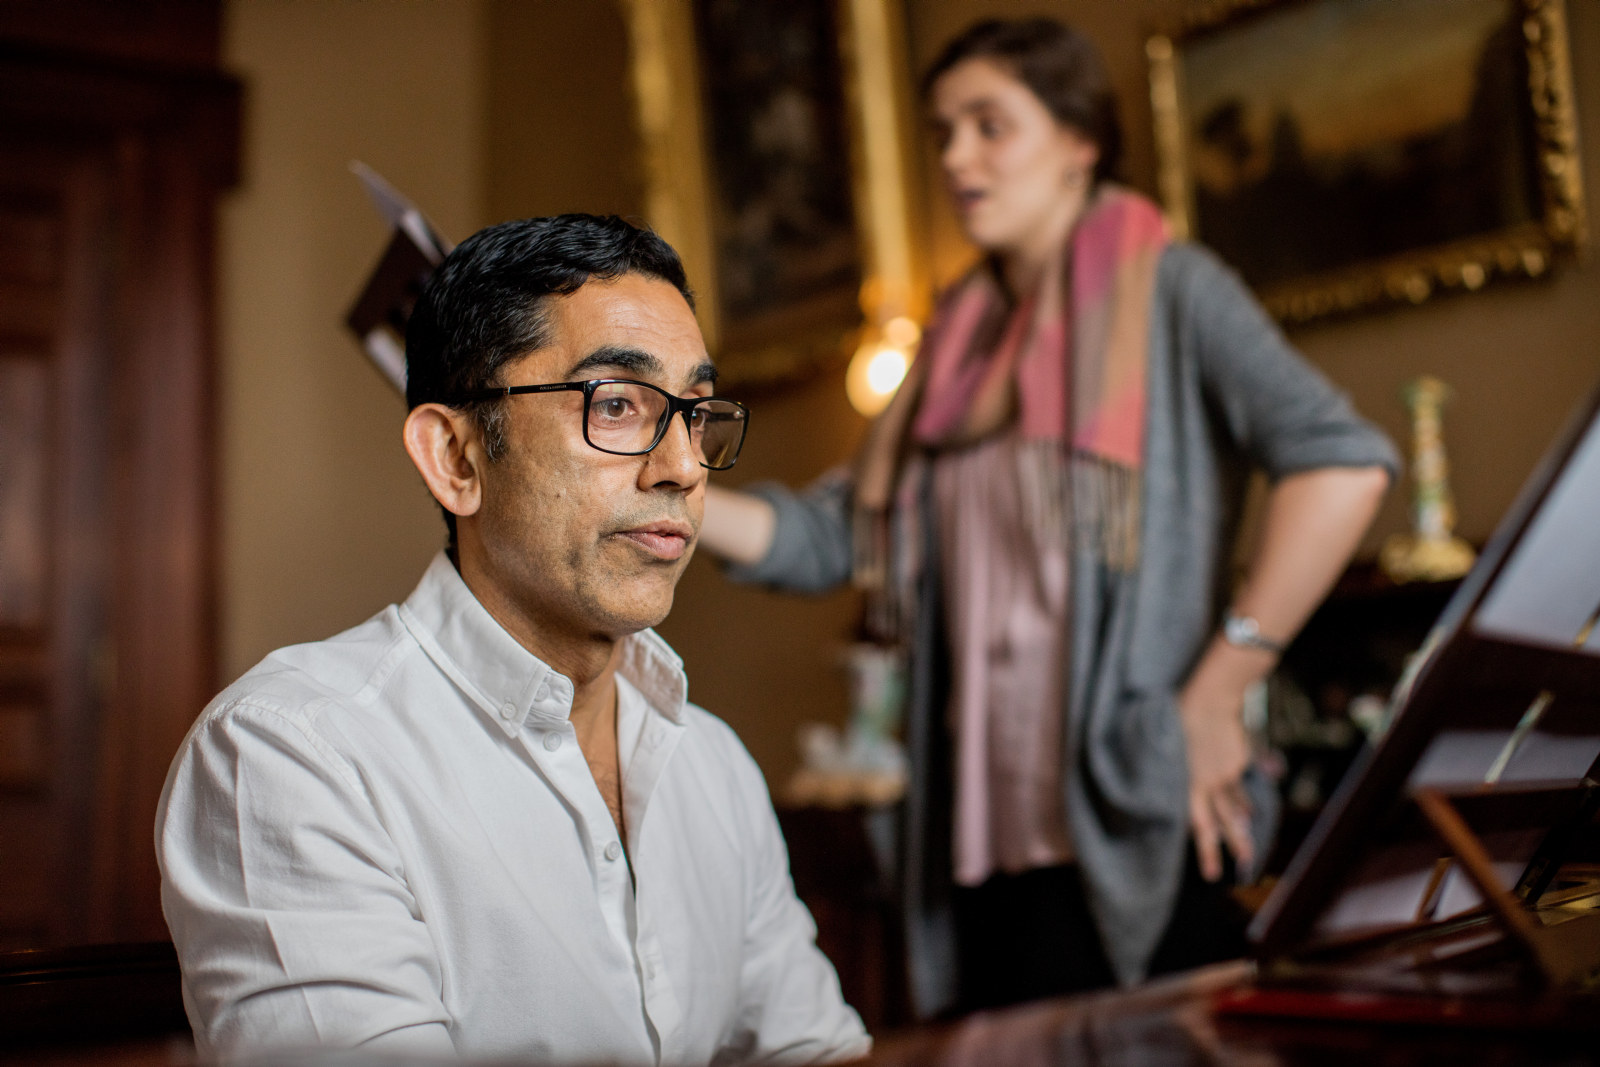 Associate Professor Neal Peres Da Costa (piano) and Nyssa Milligan (singer) from the Historical Performance Unit, Sydney Conservatorium of Music, in the drawing room at Elizabeth Bay House